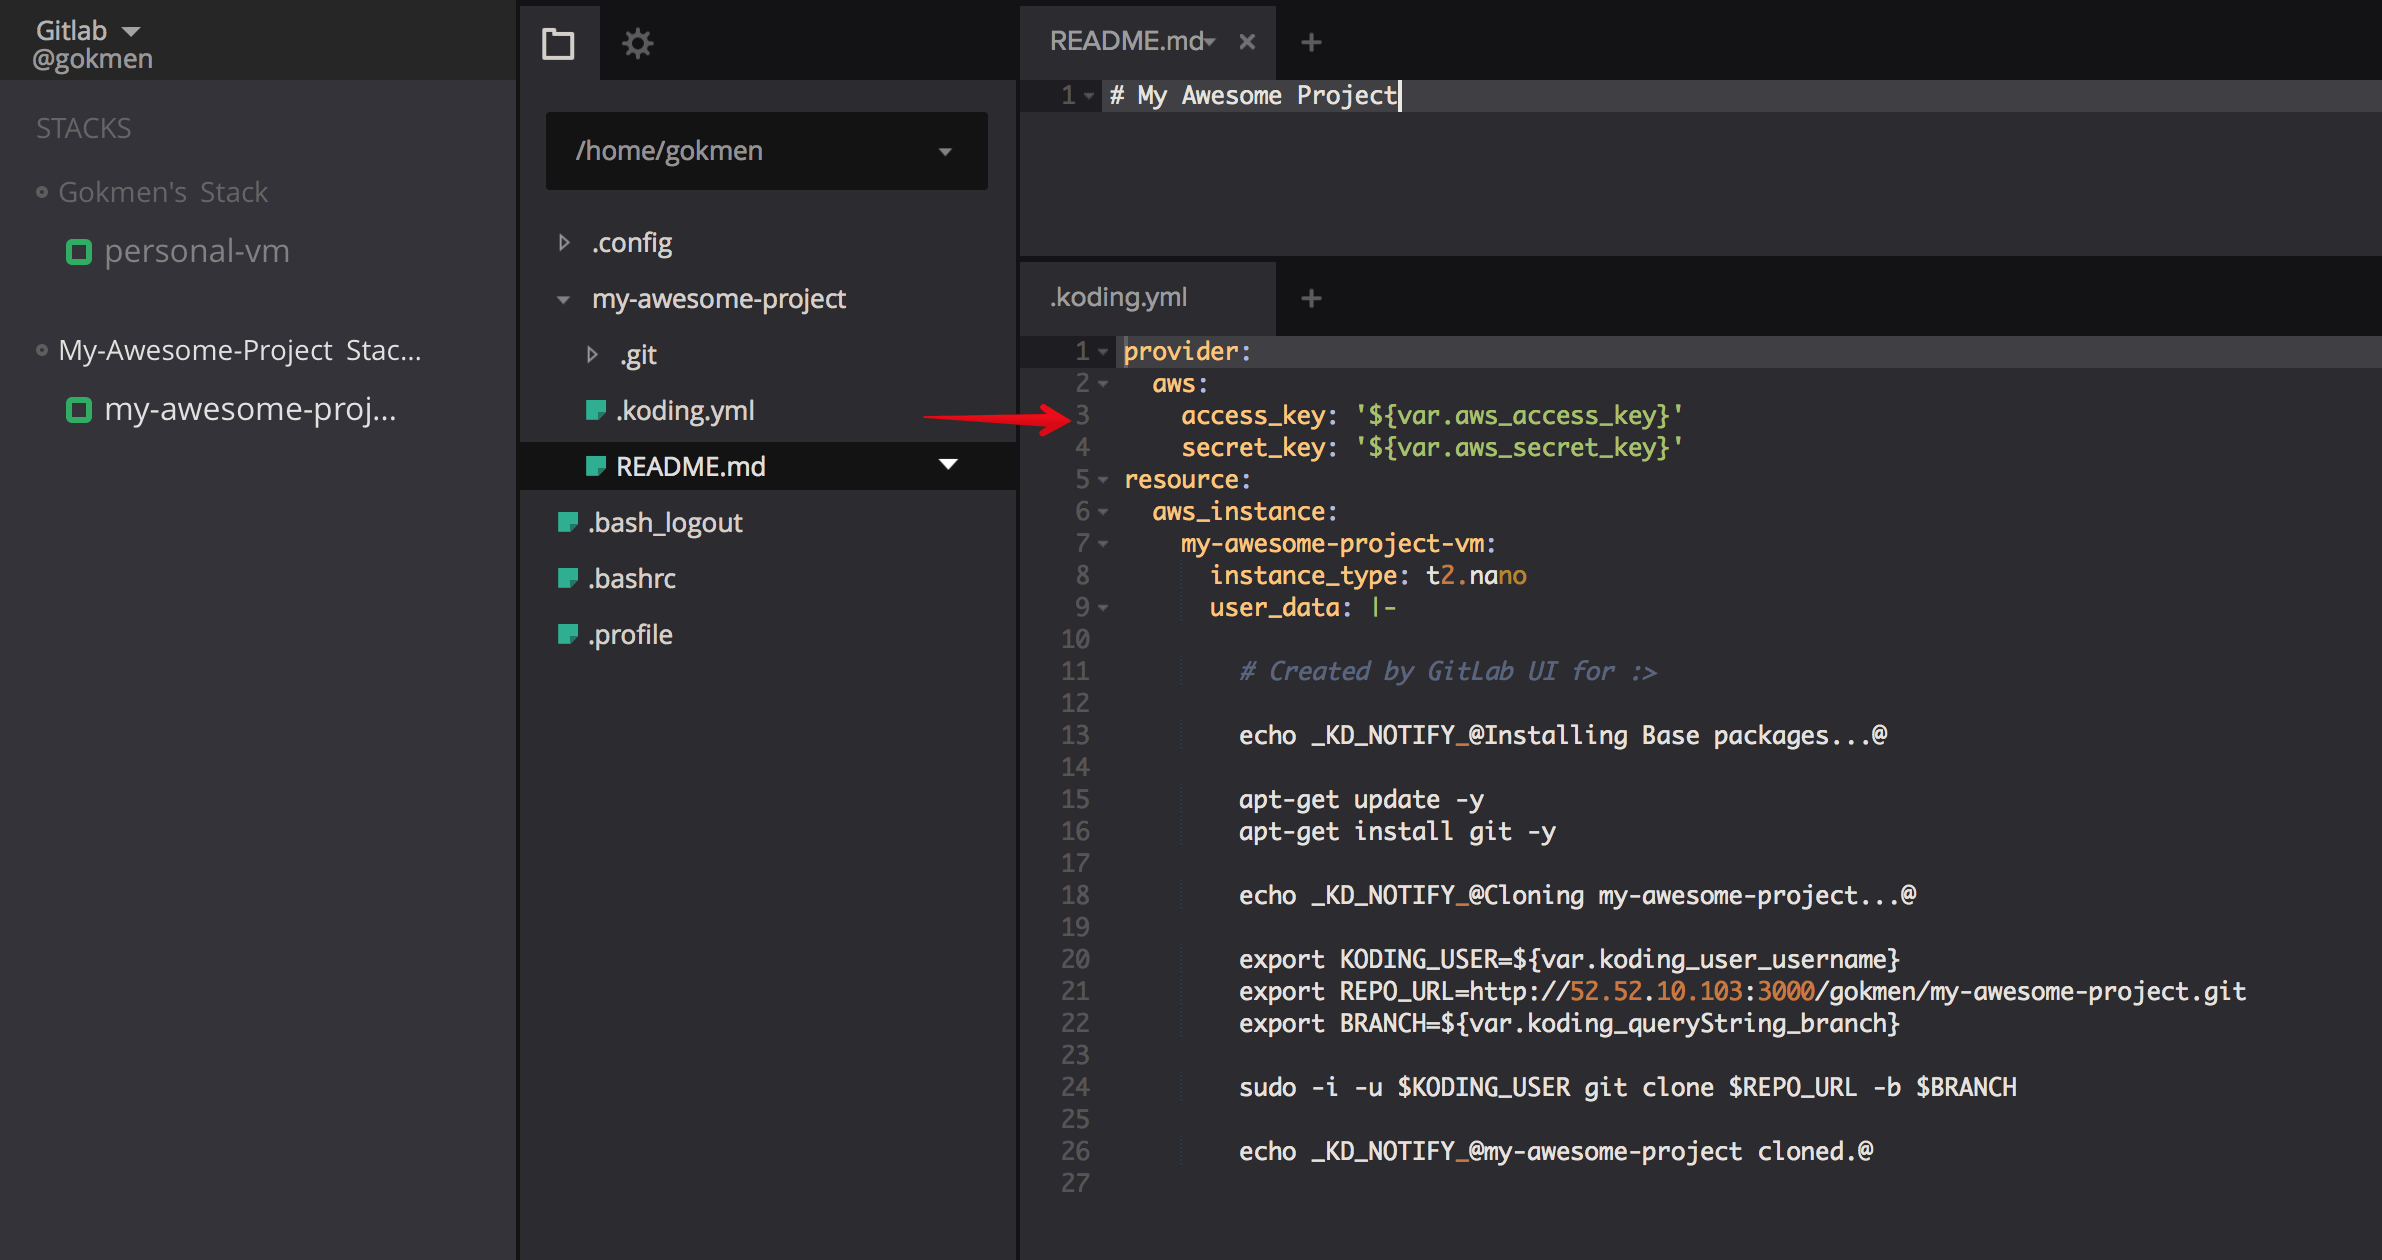 Koding, an integrated IDE in GitLab 8.11